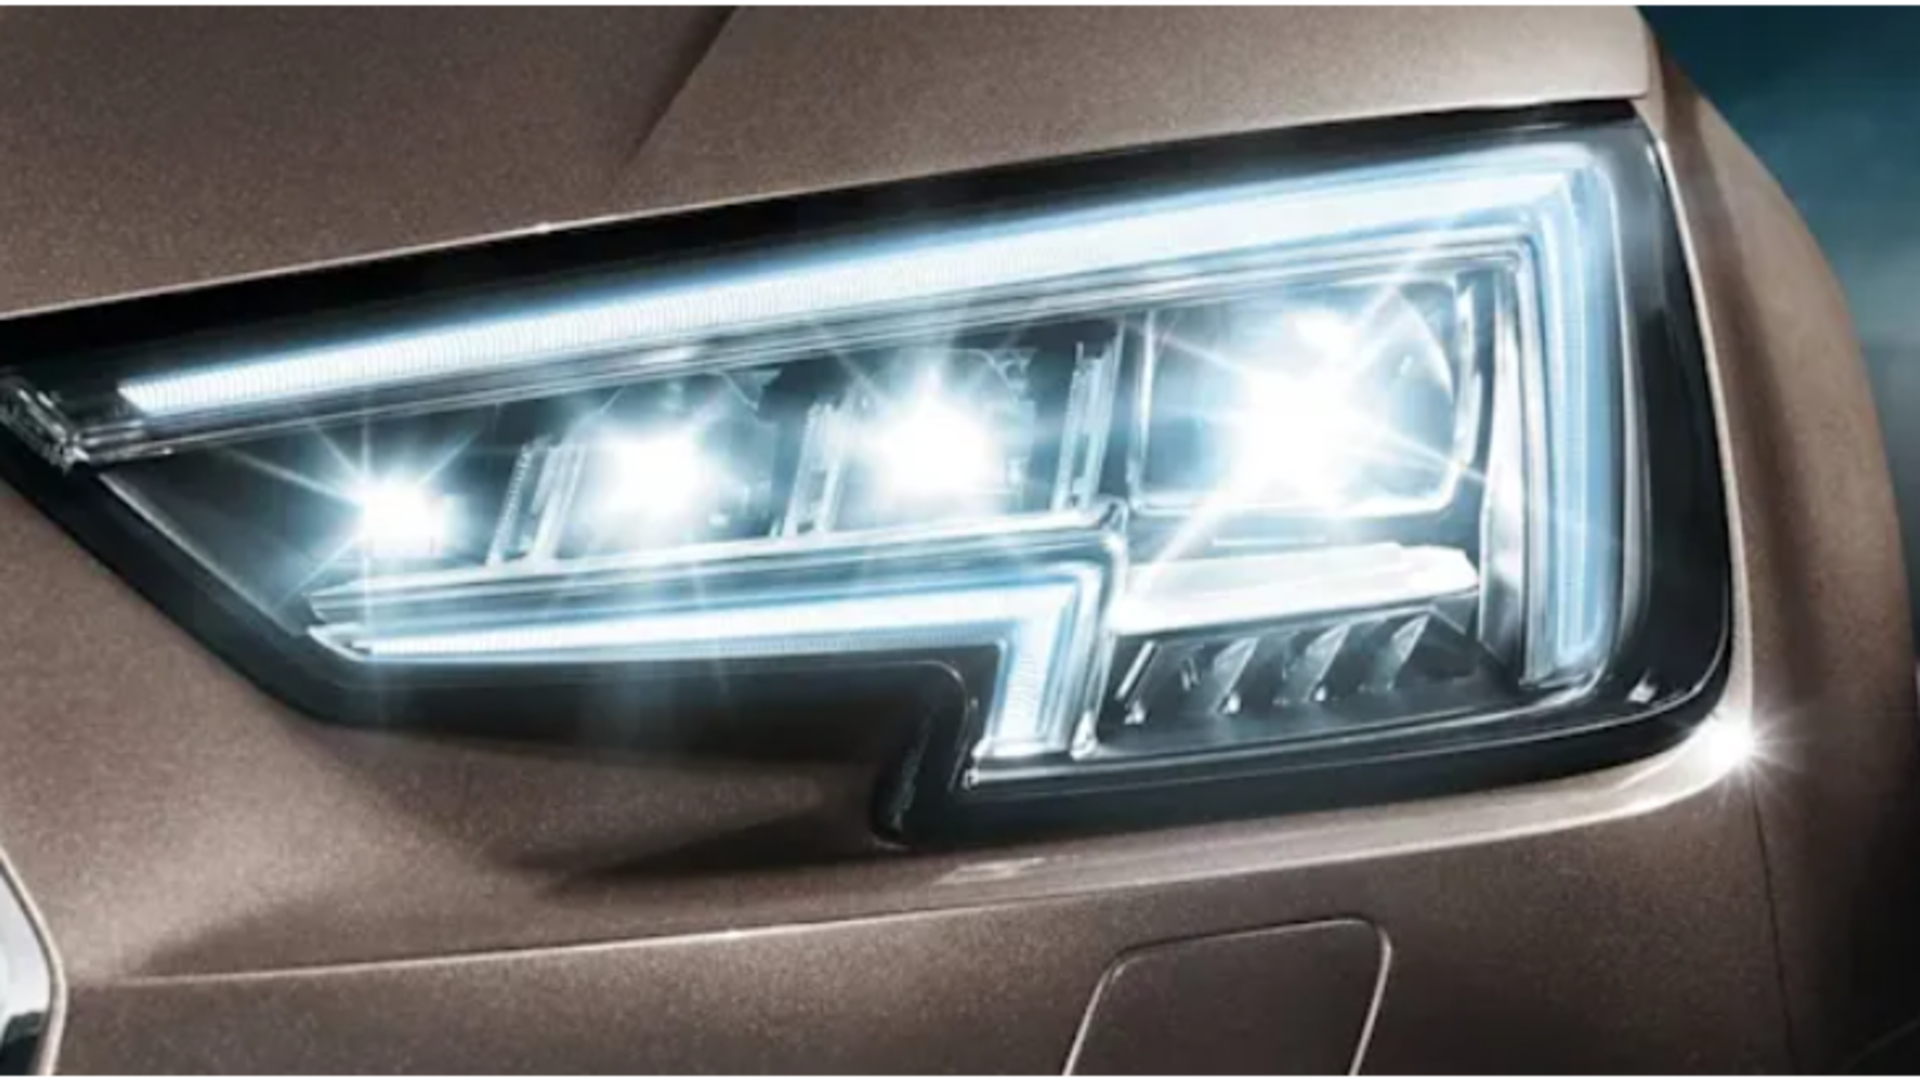 Planning to upgrade to LED headlights: Is it advisable